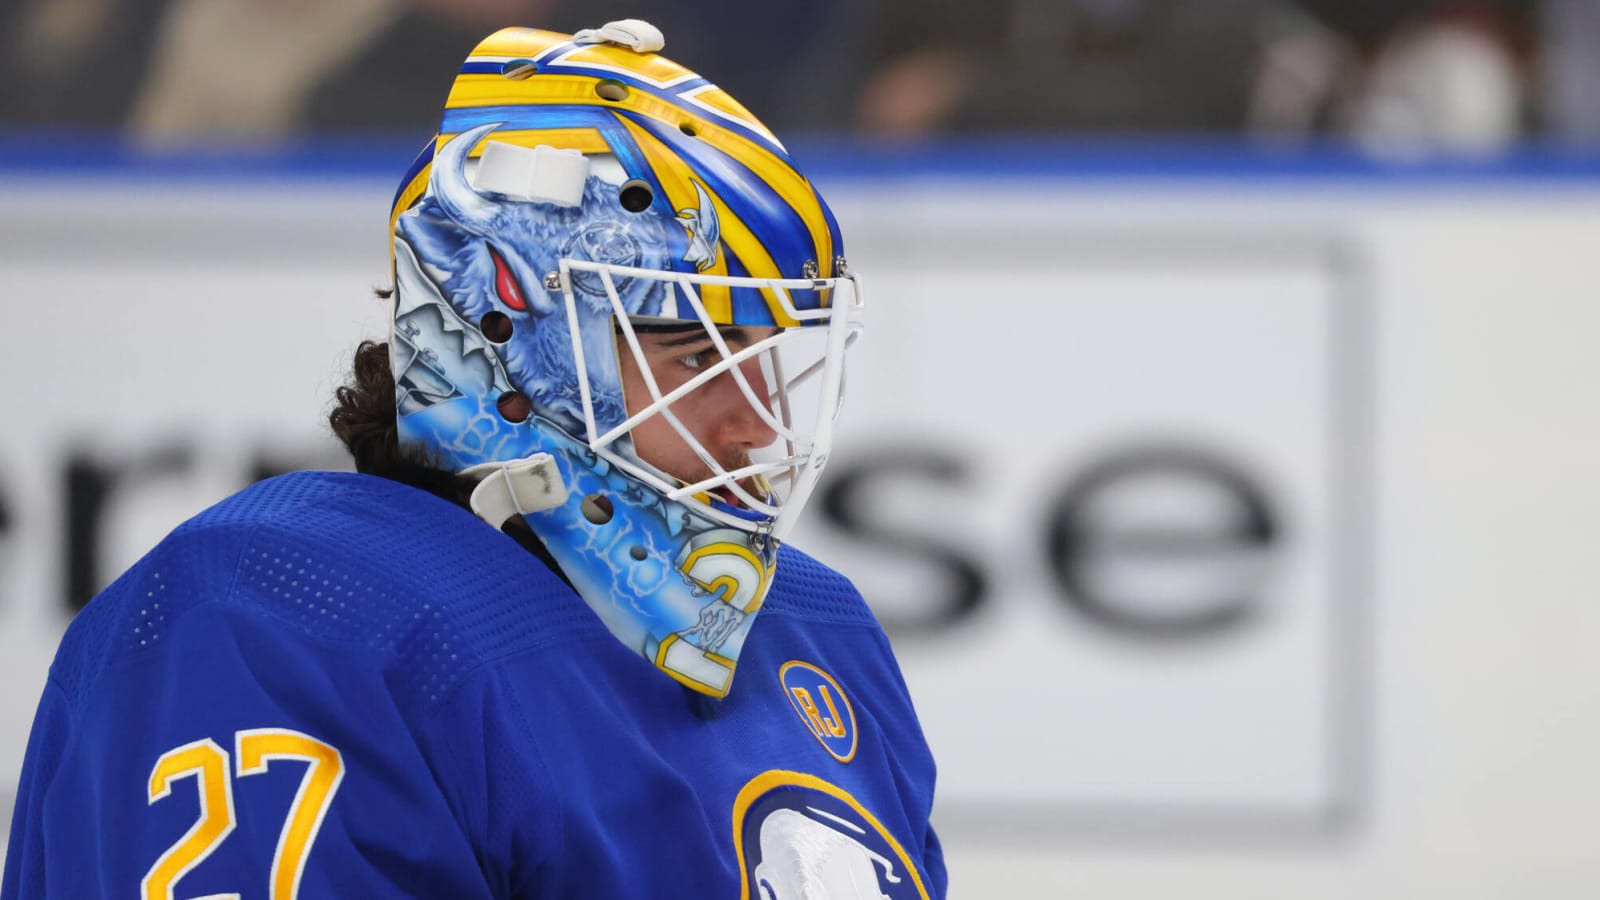 The Sabres are looking for consistency in goal